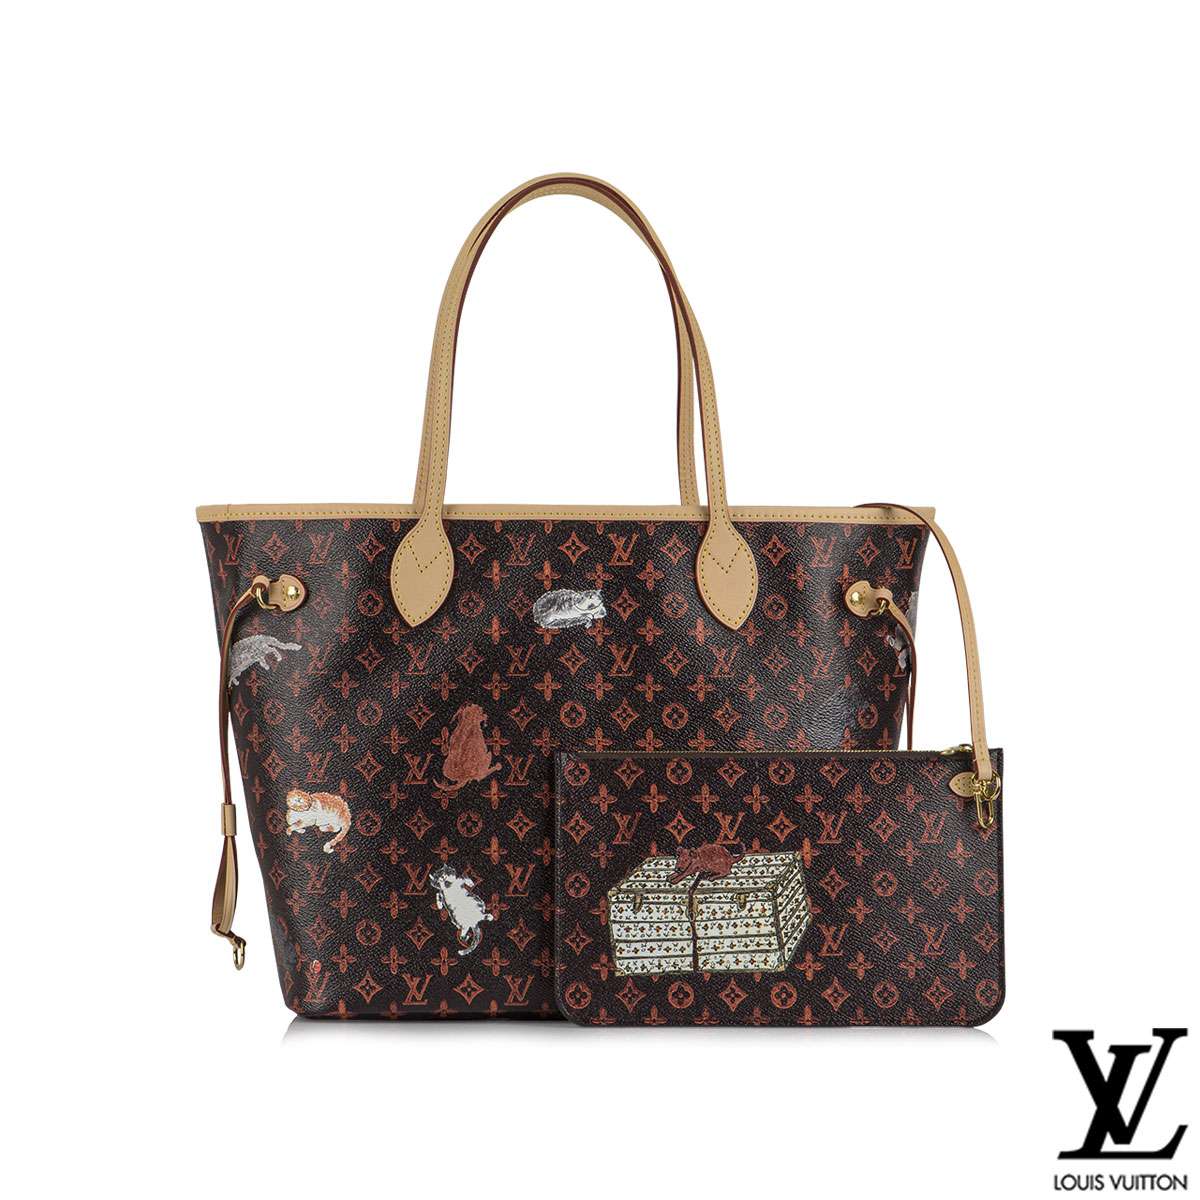 QC - LV bag from Peter - $308 including shipping to UK : r